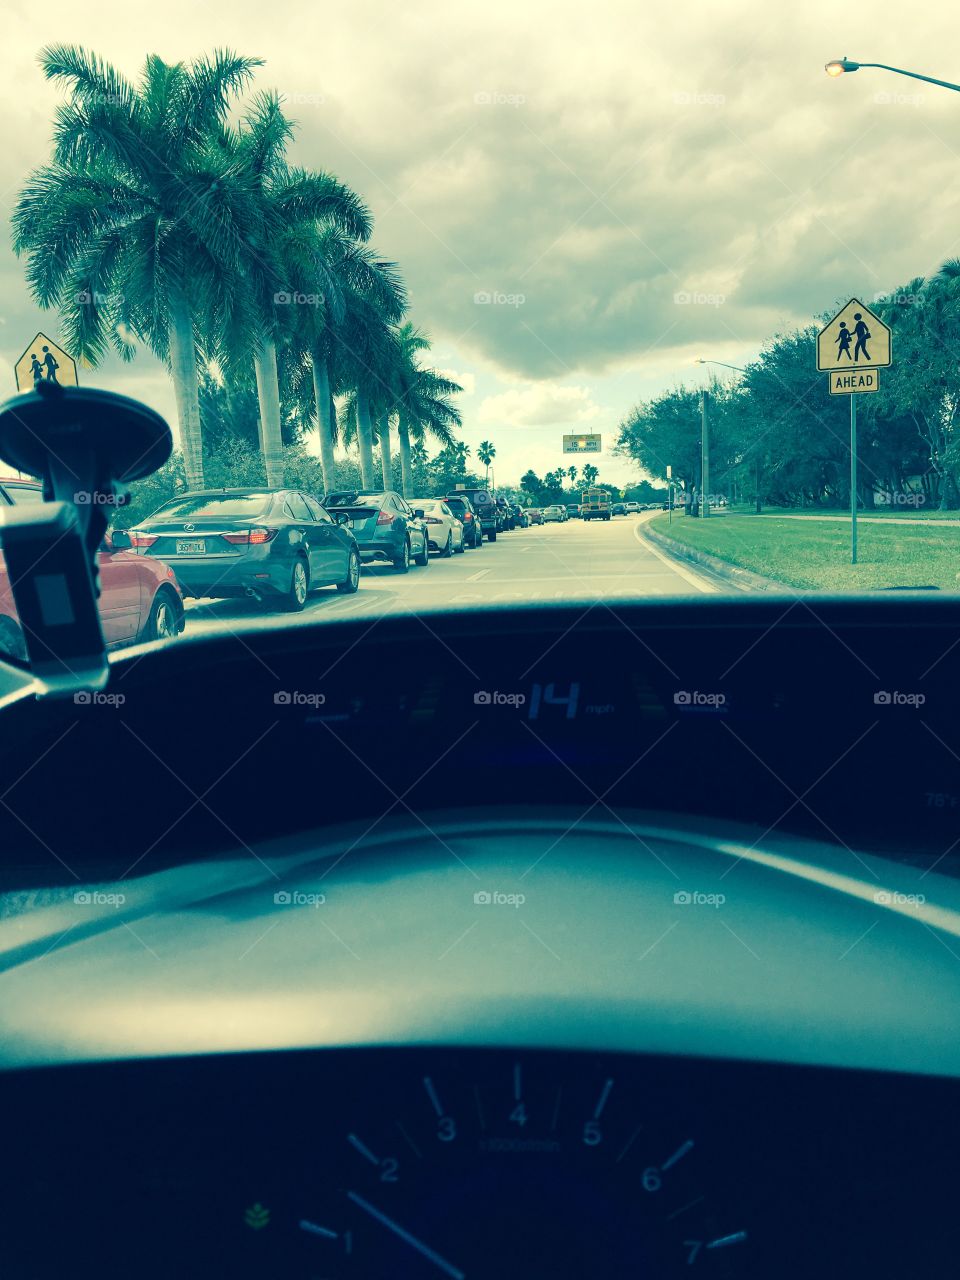 South Florida scene during traffic at school